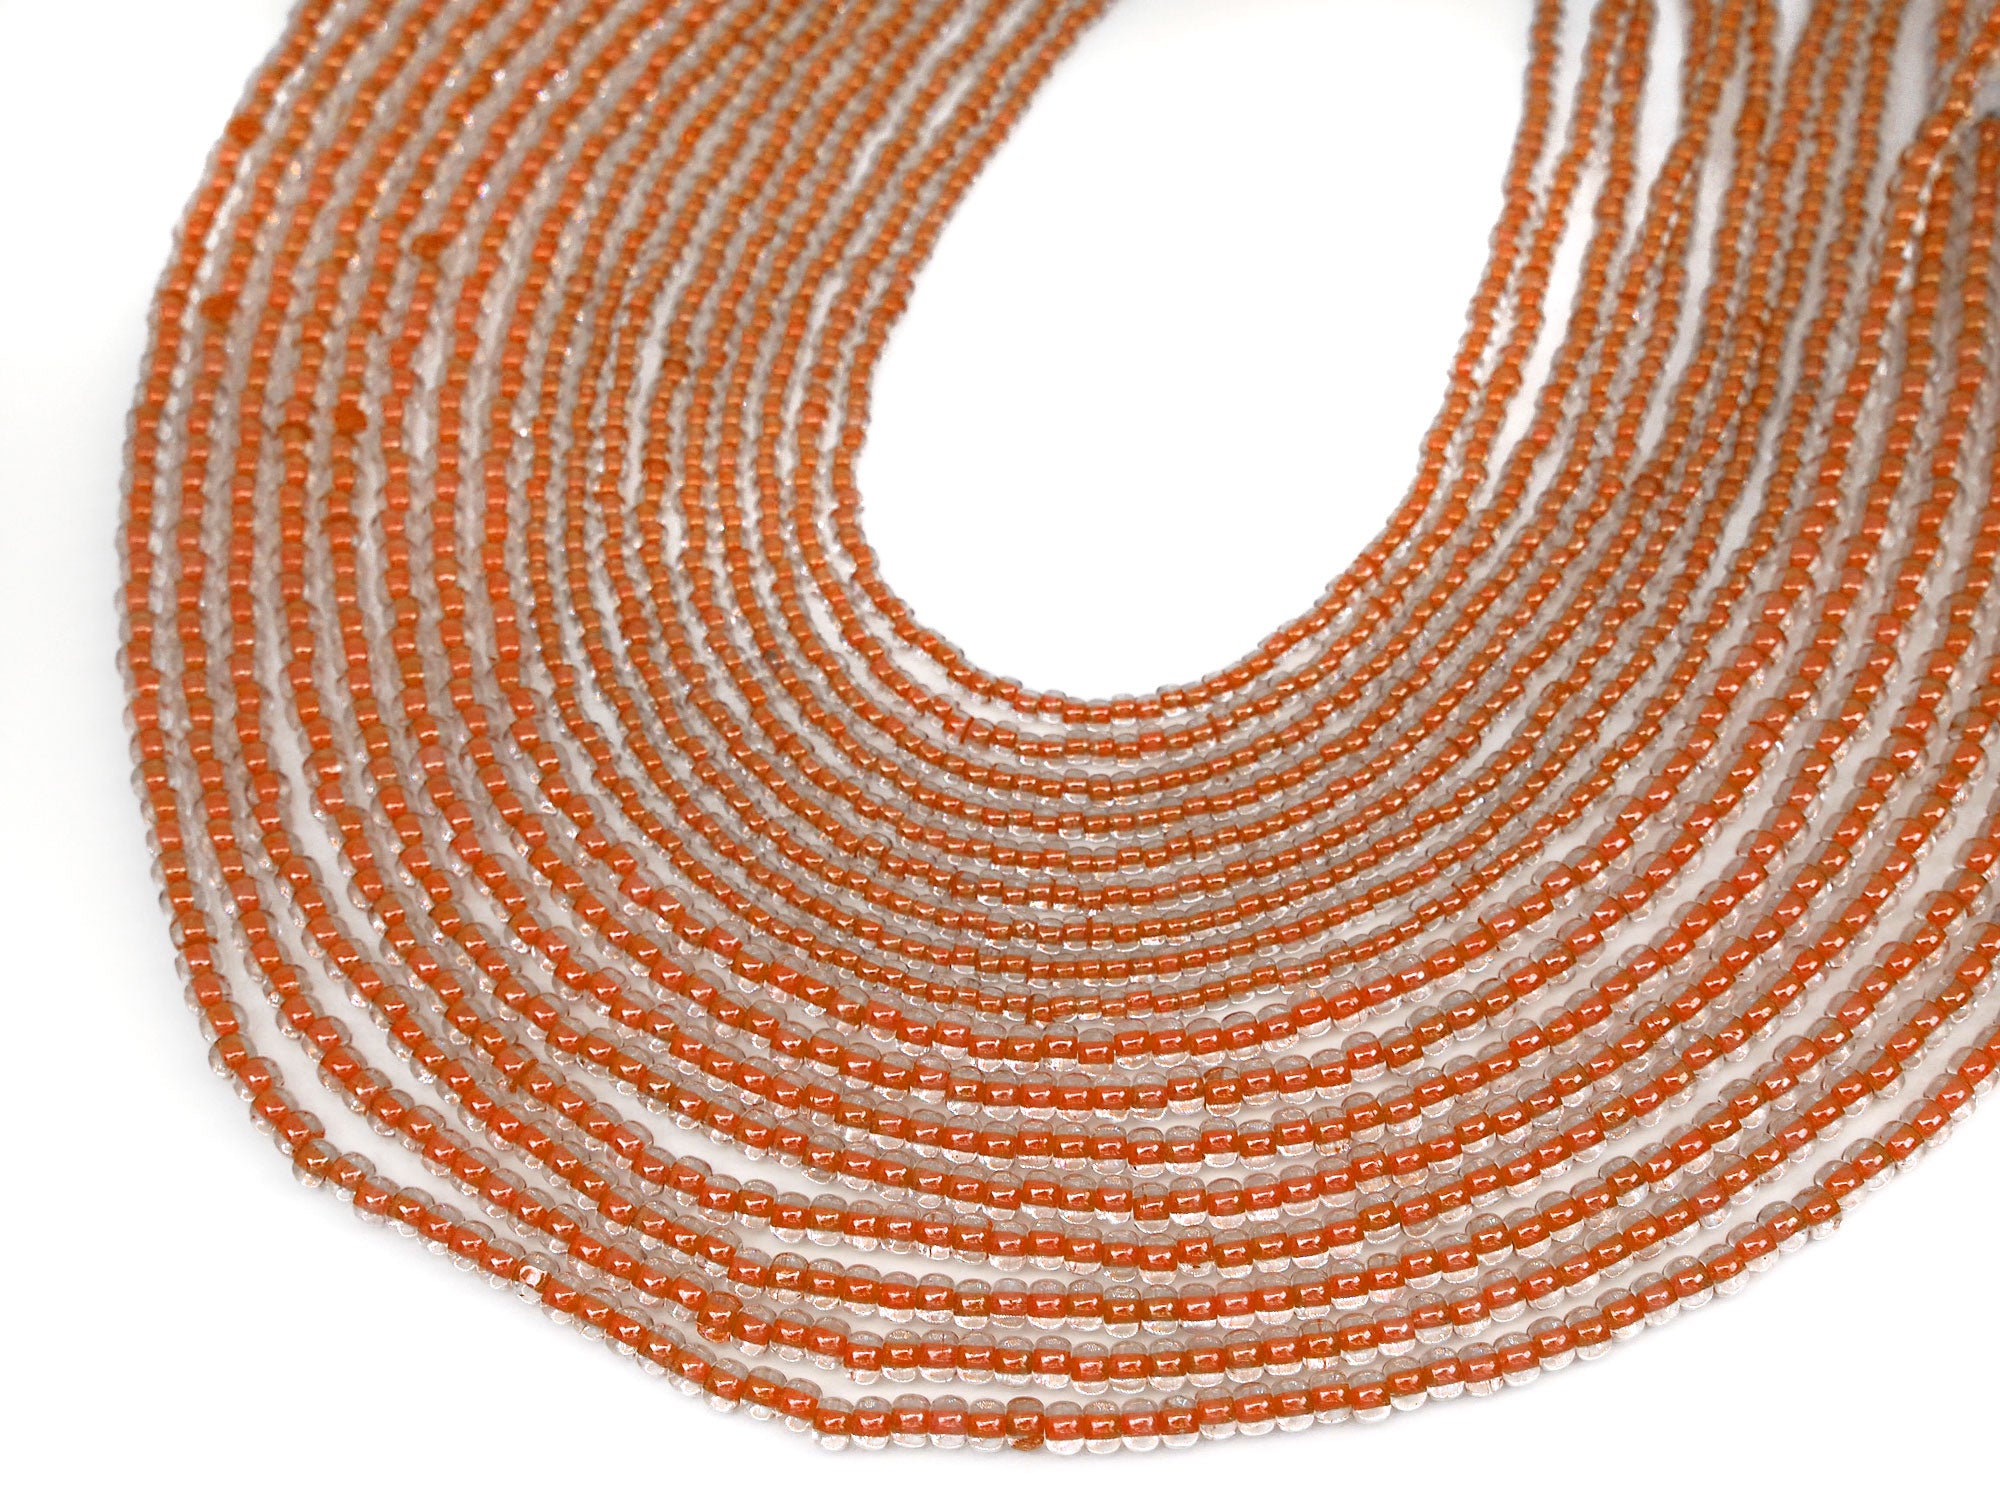 'Czech Round Smooth Pressed POPPY Glass Beads in Crystal Satin Orange Lined color, 2x3mm (size 8/0), 3x4mm (size 6/0) Druk Bead